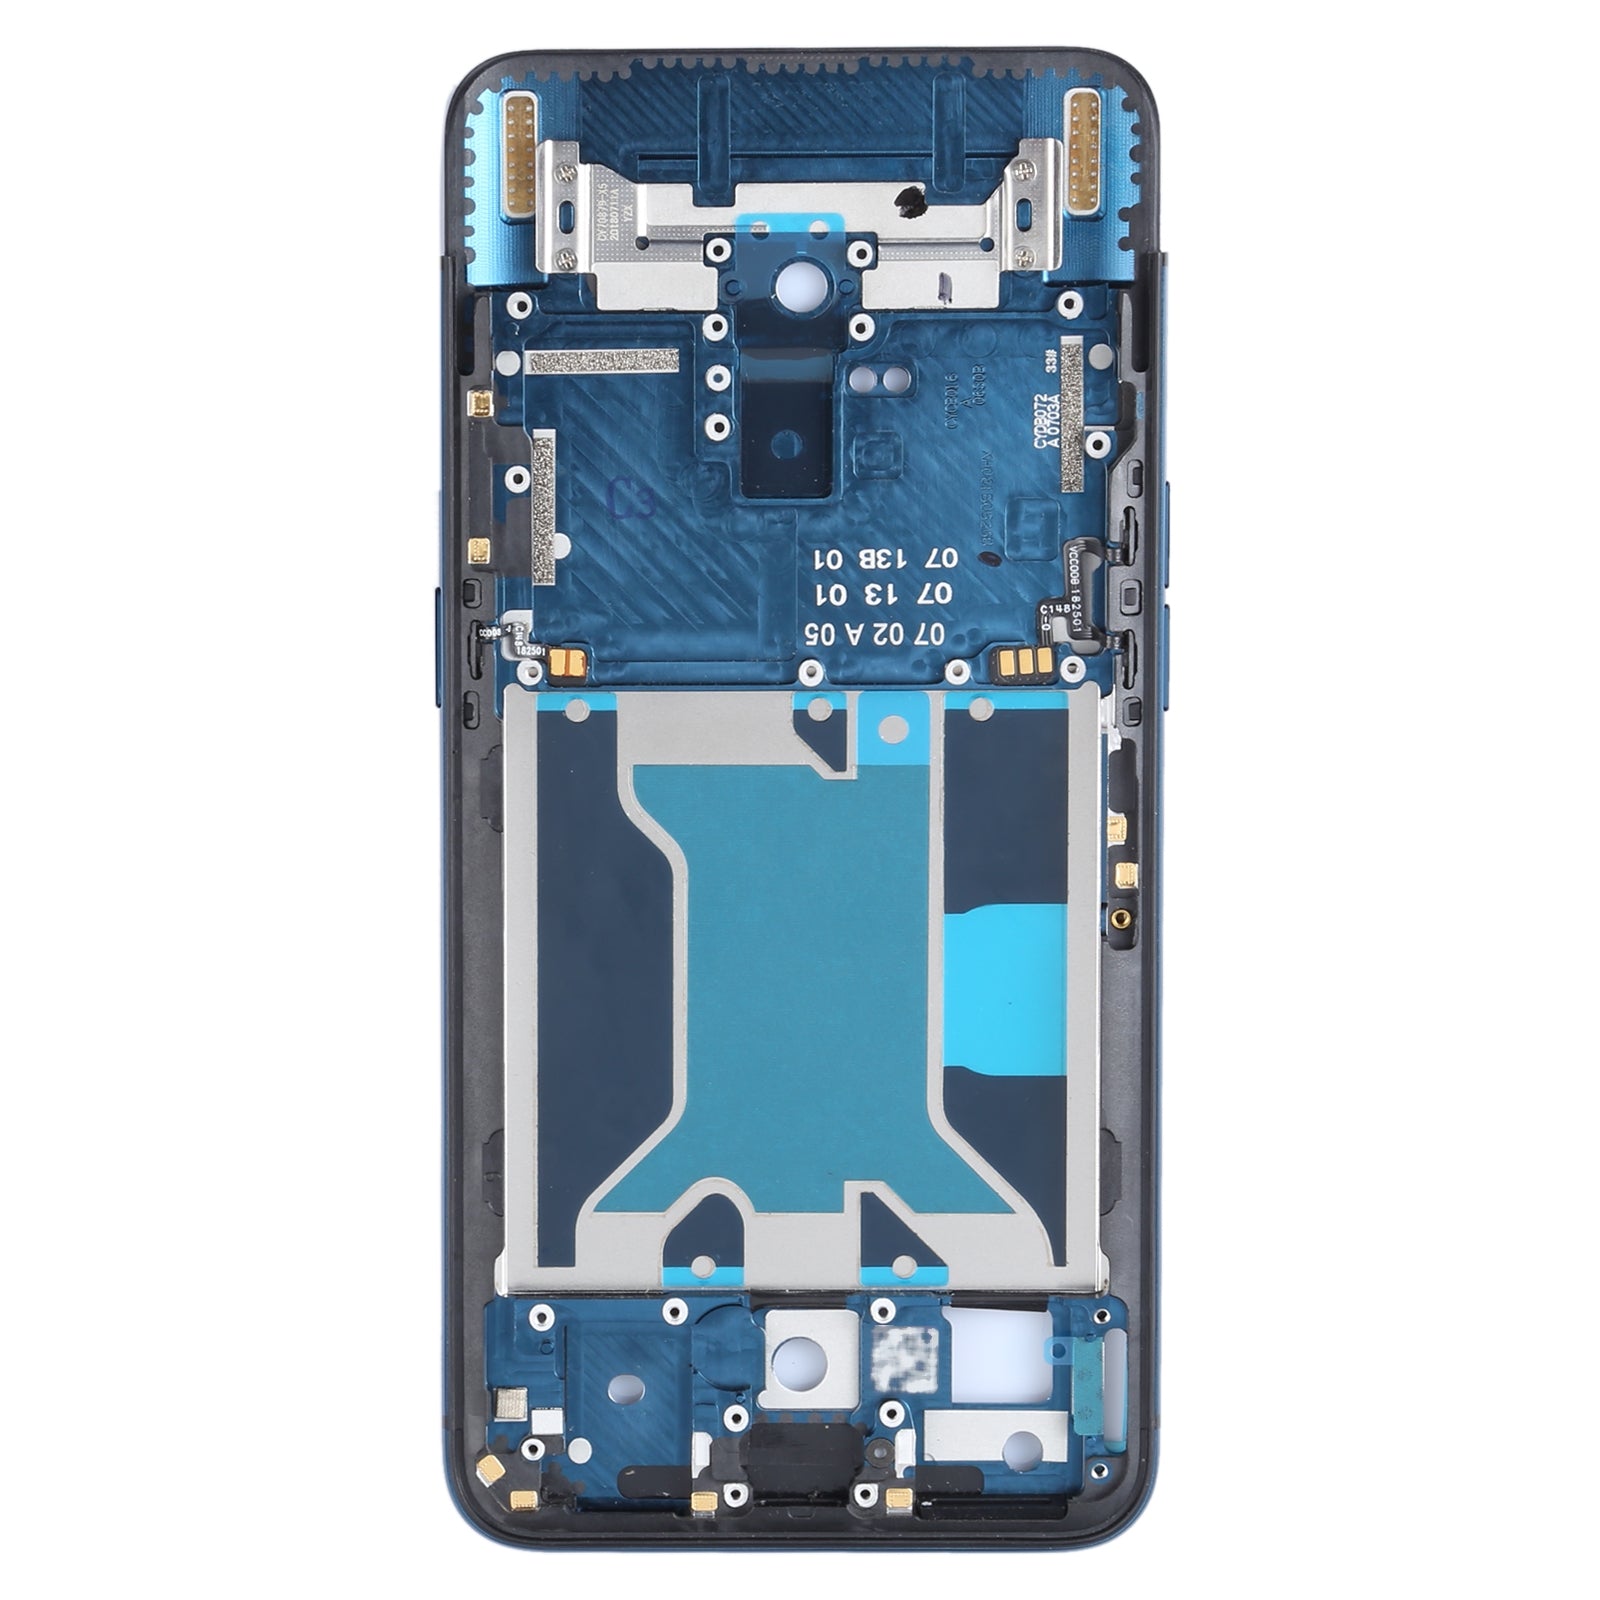 Châssis Châssis Intermédiaire LCD Oppo Find x CPP171.PAFM00 Bleu